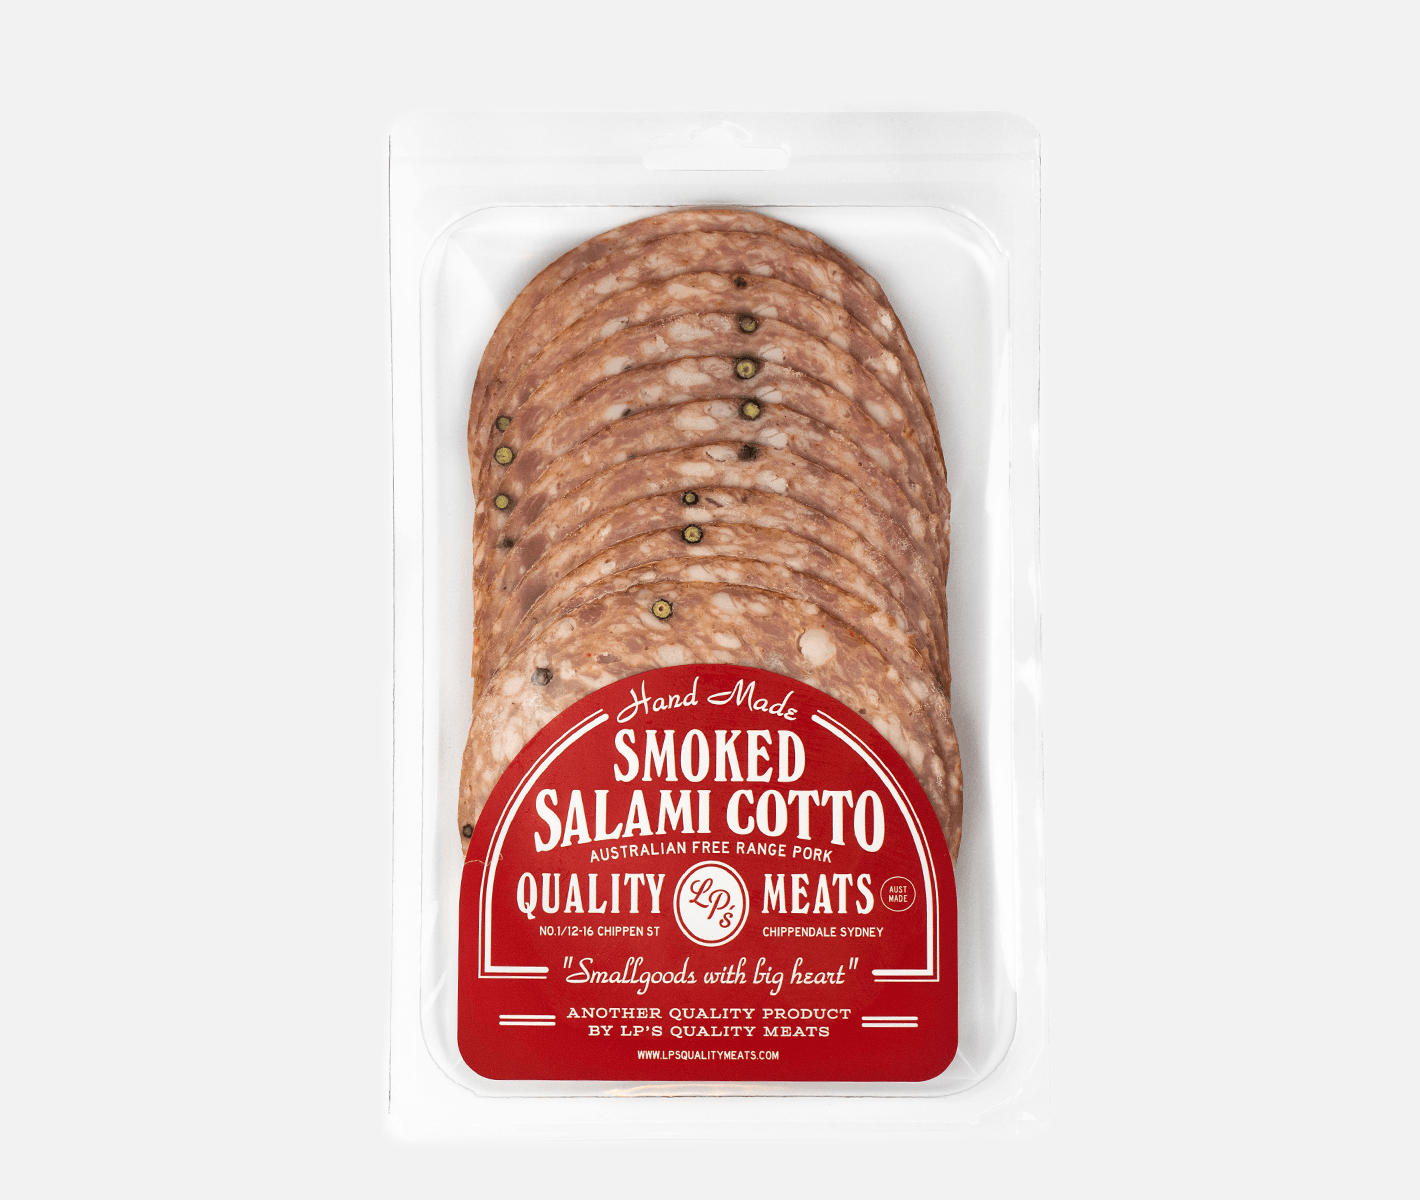 LP's Quality Meats Smoked Salami Cotto (150g) - DRNKS